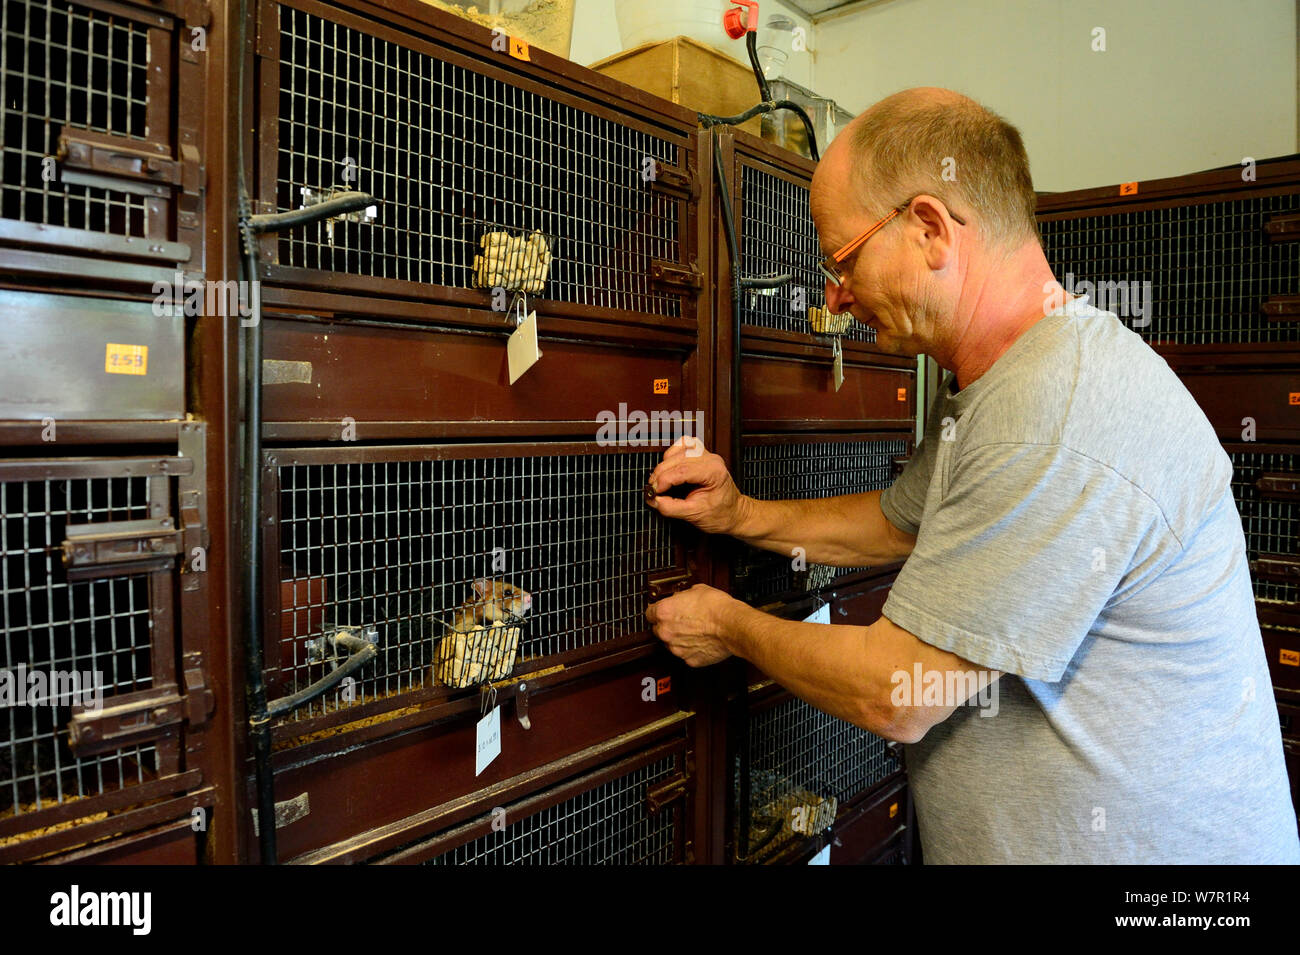 Jean Paul Burget, President of the French association 'Sauvegarde Faune Sauvage d'Alsace' (Wildlife Conservation of Alsace) in his breeding center for common hamster (Cricetus cricetus), Elsenheim, Alsace, France, April 2013 Stock Photo